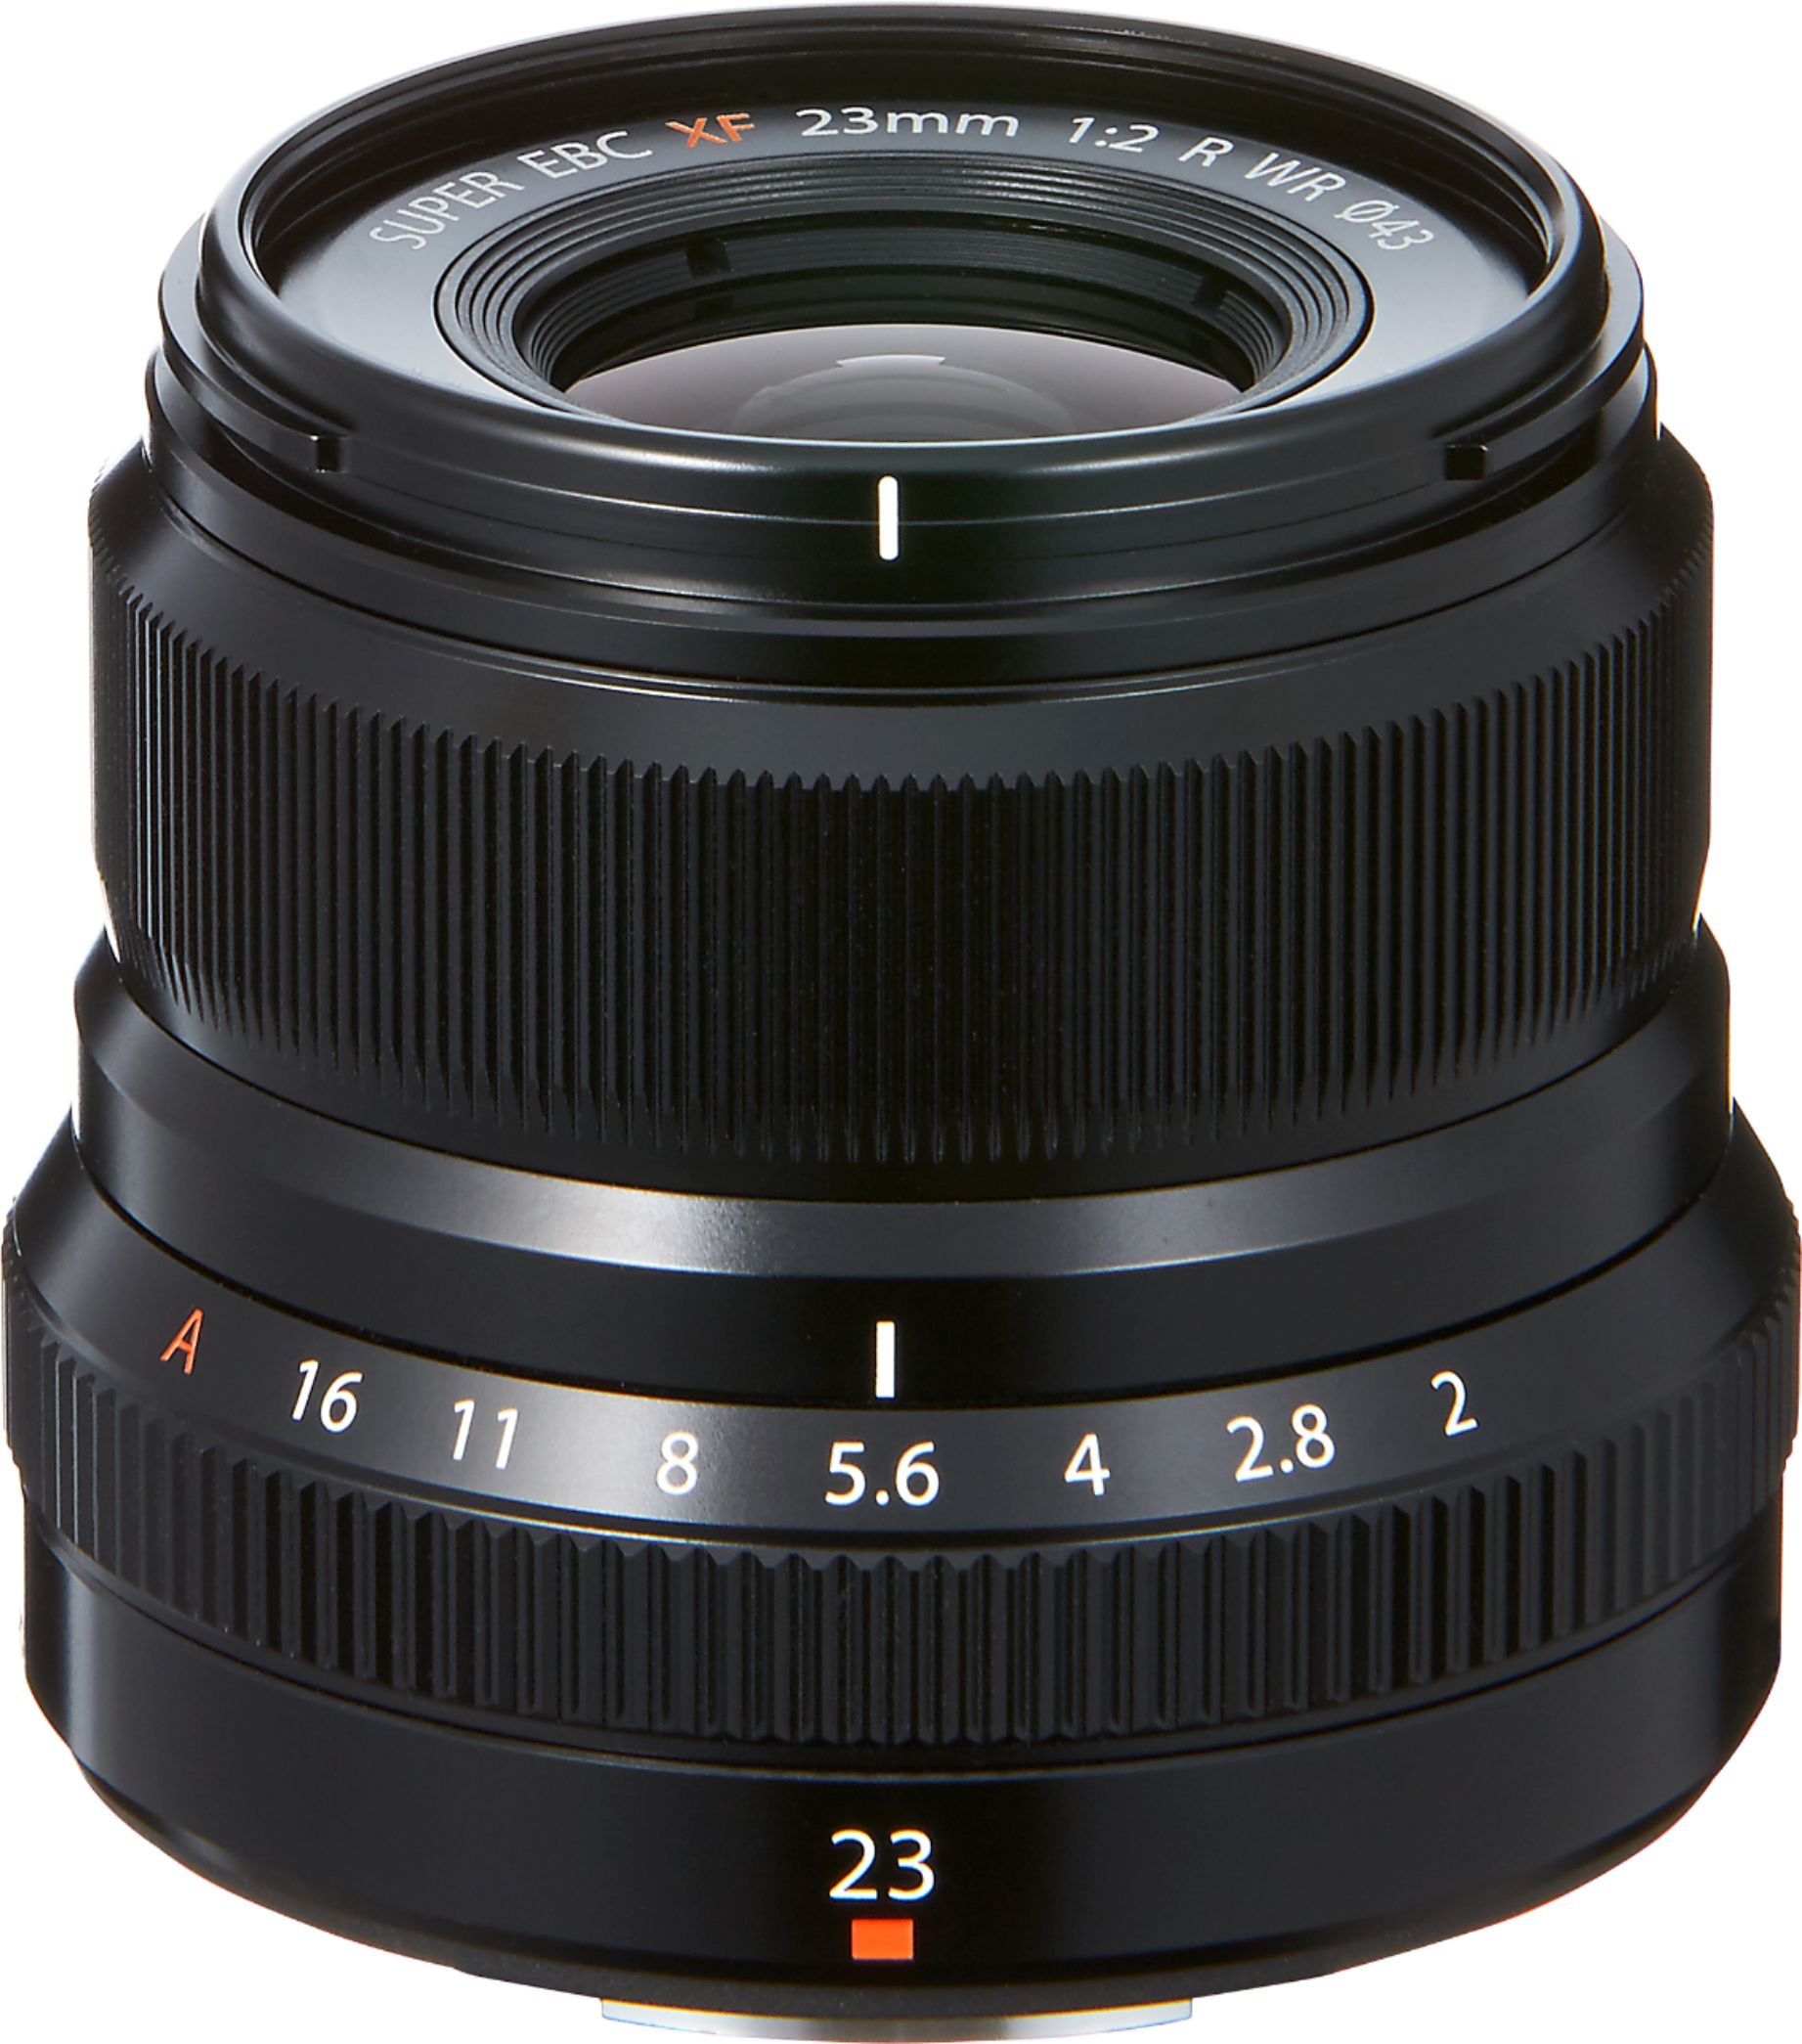 XF23mmF2 R WR Wide-angle Lens for Fujifilm X-Mount System Cameras 